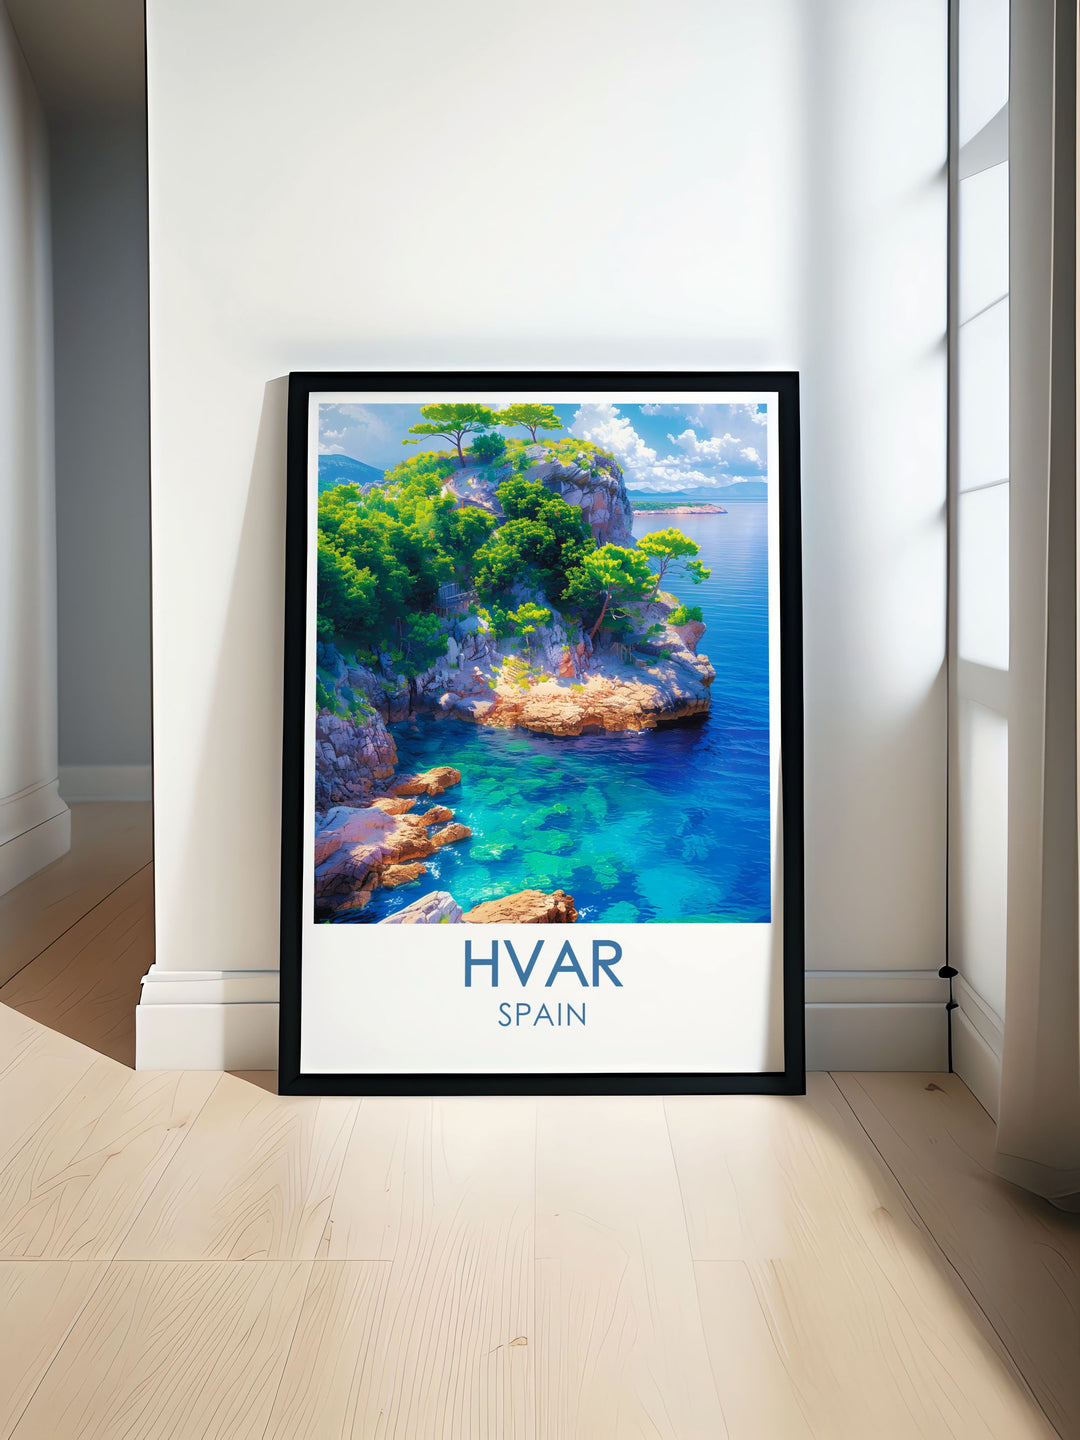 A vintage poster of Hvar, capturing its timeless beauty and coastal allure. This print is perfect for anyone who loves classic Mediterranean scenery and wants to bring a piece of Adriatic elegance into their home.